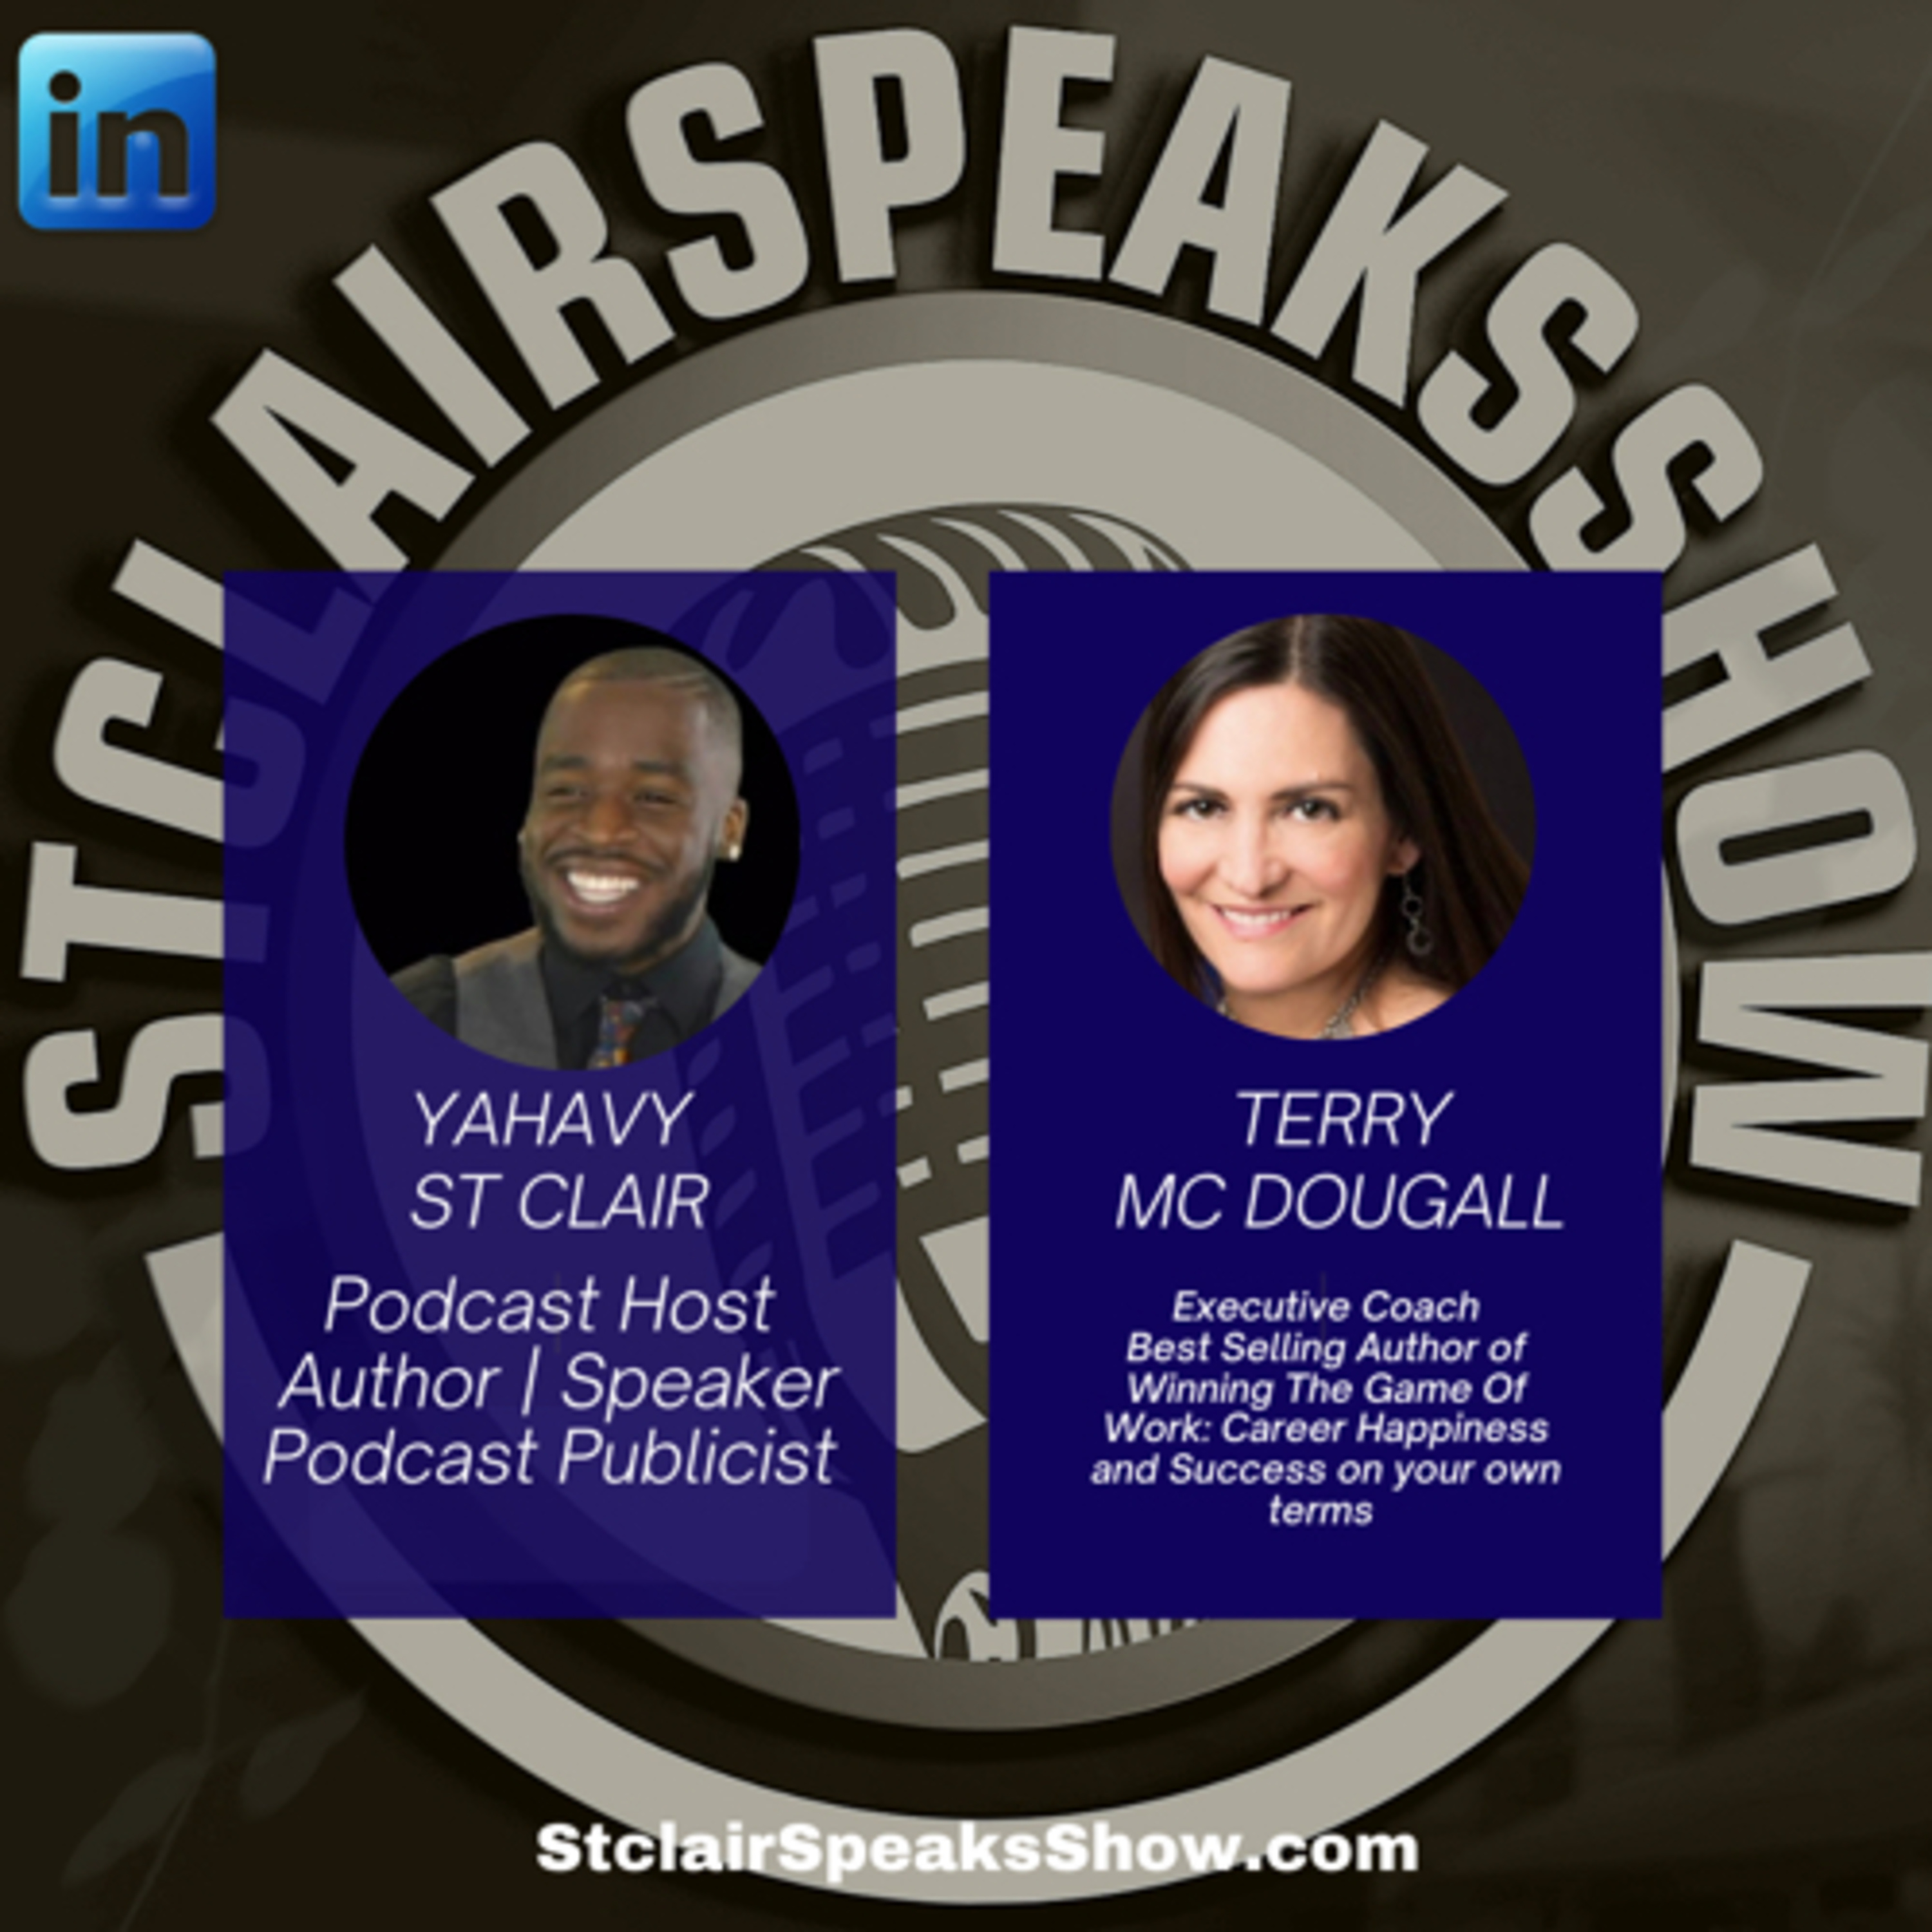 The StclairSpeaksShow Featuring Terry Boyle McDougall Best Selling Author of Winning The Game of Work: Career Happiness and Success on your own terms.